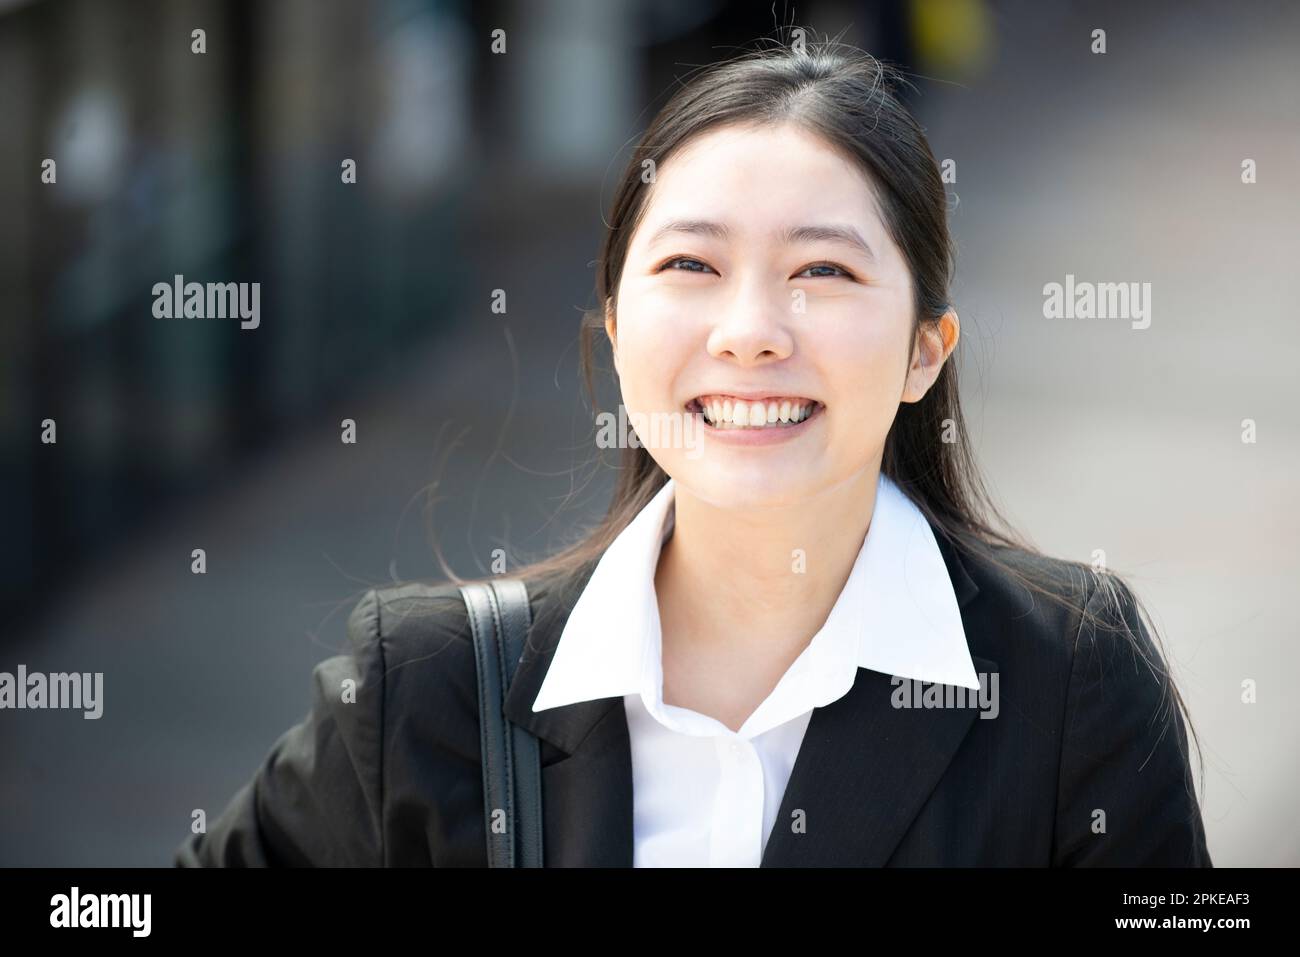 Woman in suit laughing Stock Photo